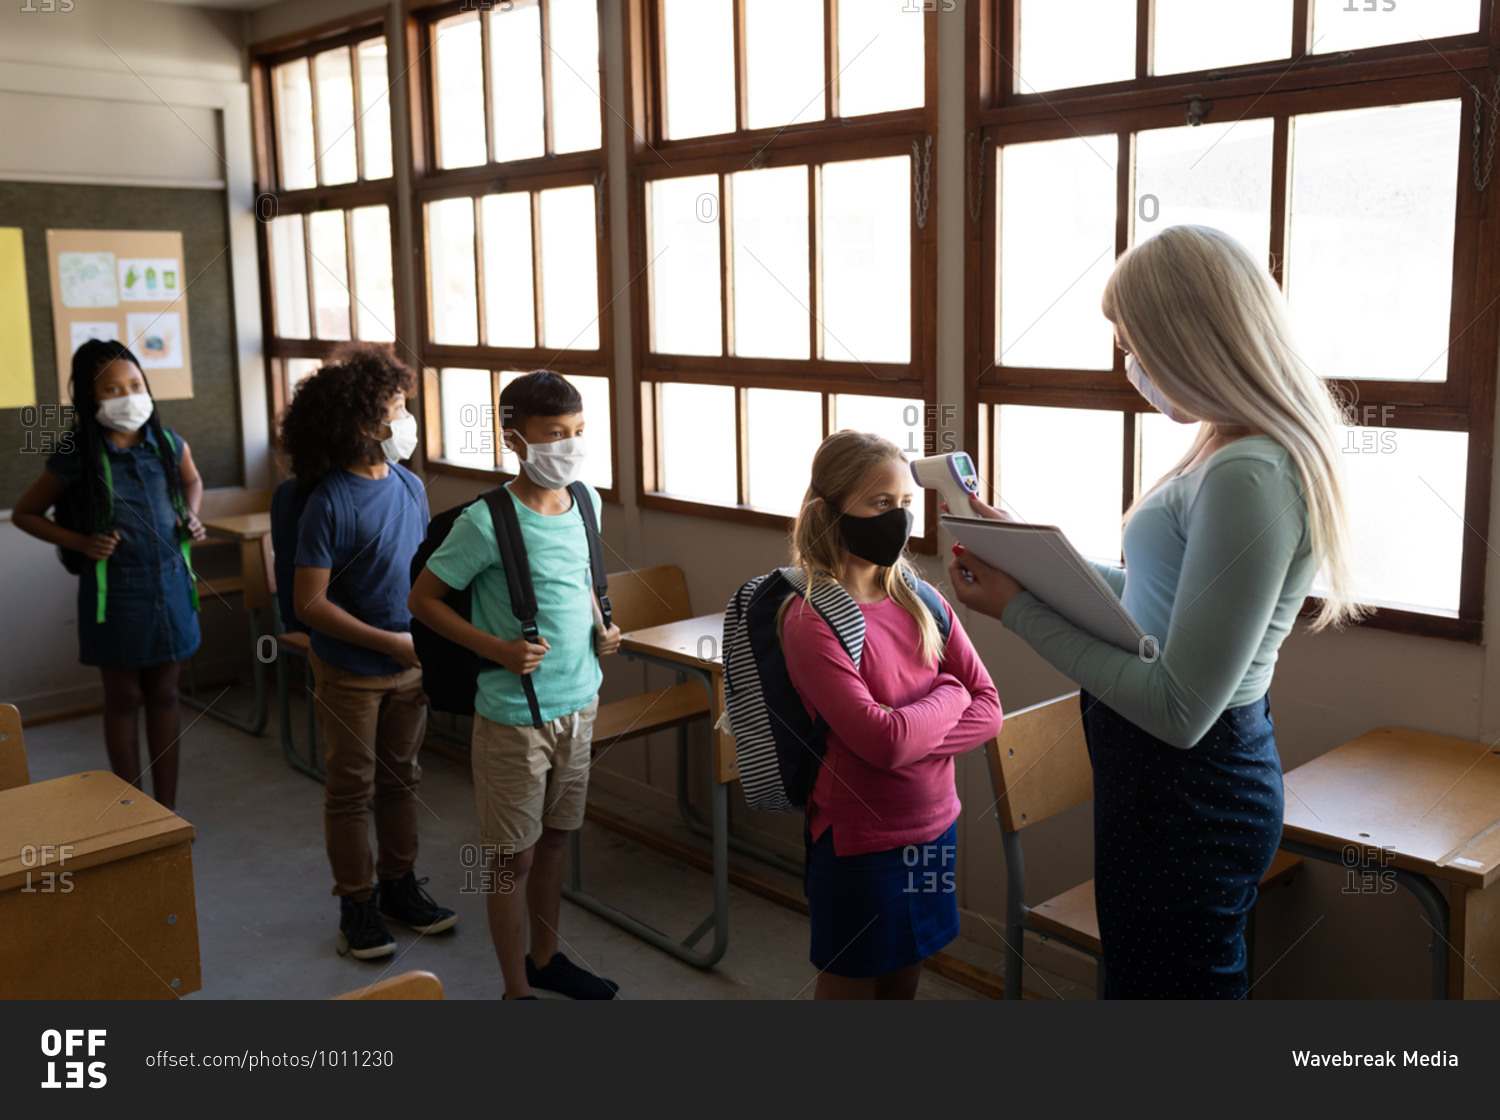 Caucasian female teacher wearing face mask measuring temperature of children in an elementary school. Primary education social distancing health safety during Covid19 Coronavirus pandemic.